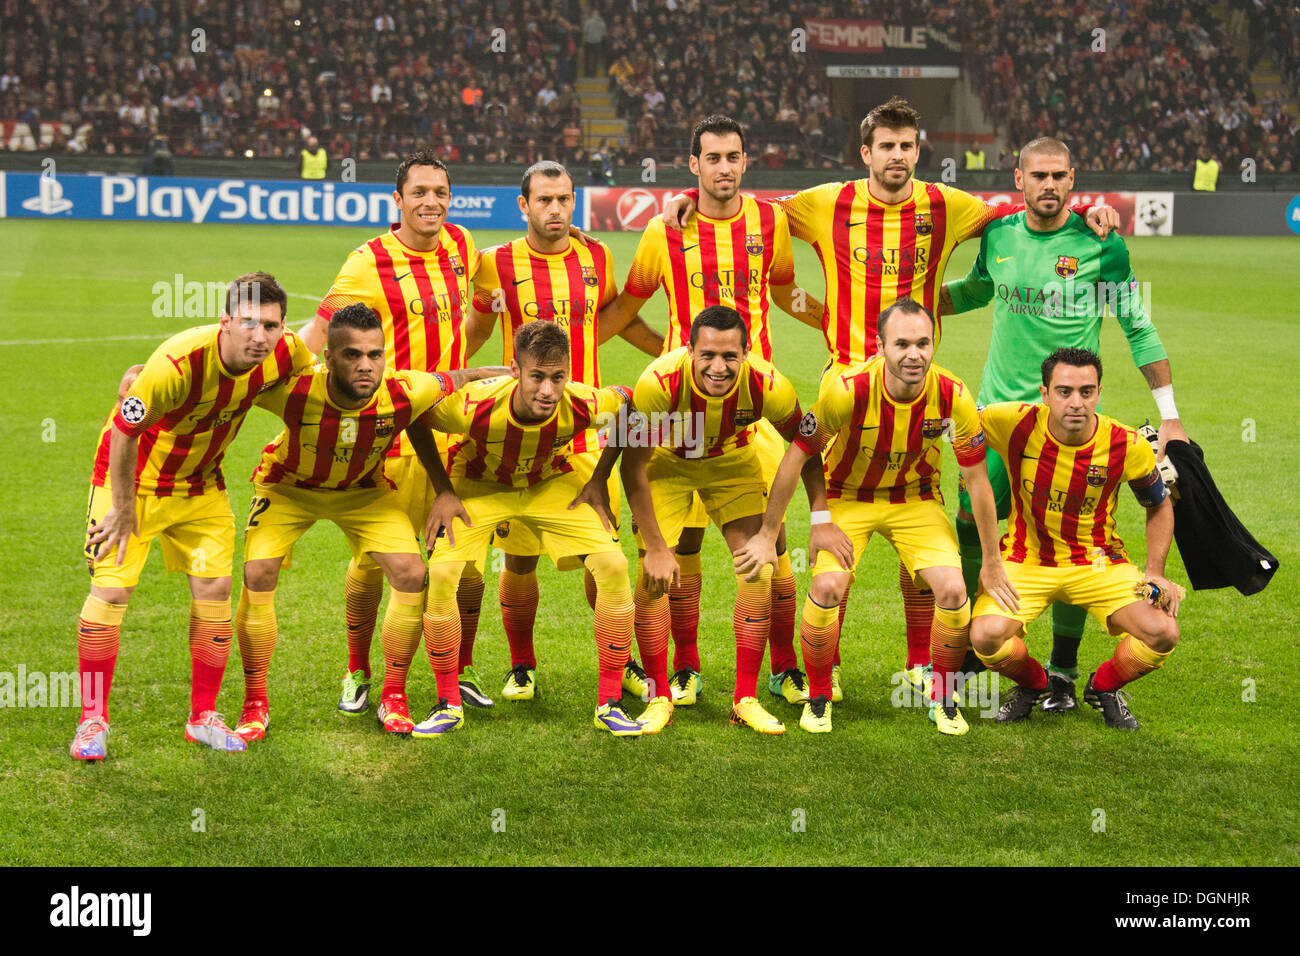 Milan, Italy. 22nd Oct, 2013. Barcelona team group line-up Football / Soccer : Barcelona team group (Top L-R) Adriano, Javier Mascherano, Sergio Busquets, Gerard Pique, Victor Valdes, (Bottom L-R) Lionel Messi, Daniel Alves, Neymar, Alexis Sanchez, Andres Iniesta and Xavi before the UEFA Champions League Group H match between AC Milan 1-1 FC Barcelona at Stadio Giuseppe Meazza in Milan, Italy . © Enrico Calderoni/AFLO SPORT/Alamy Live News Stock Photo